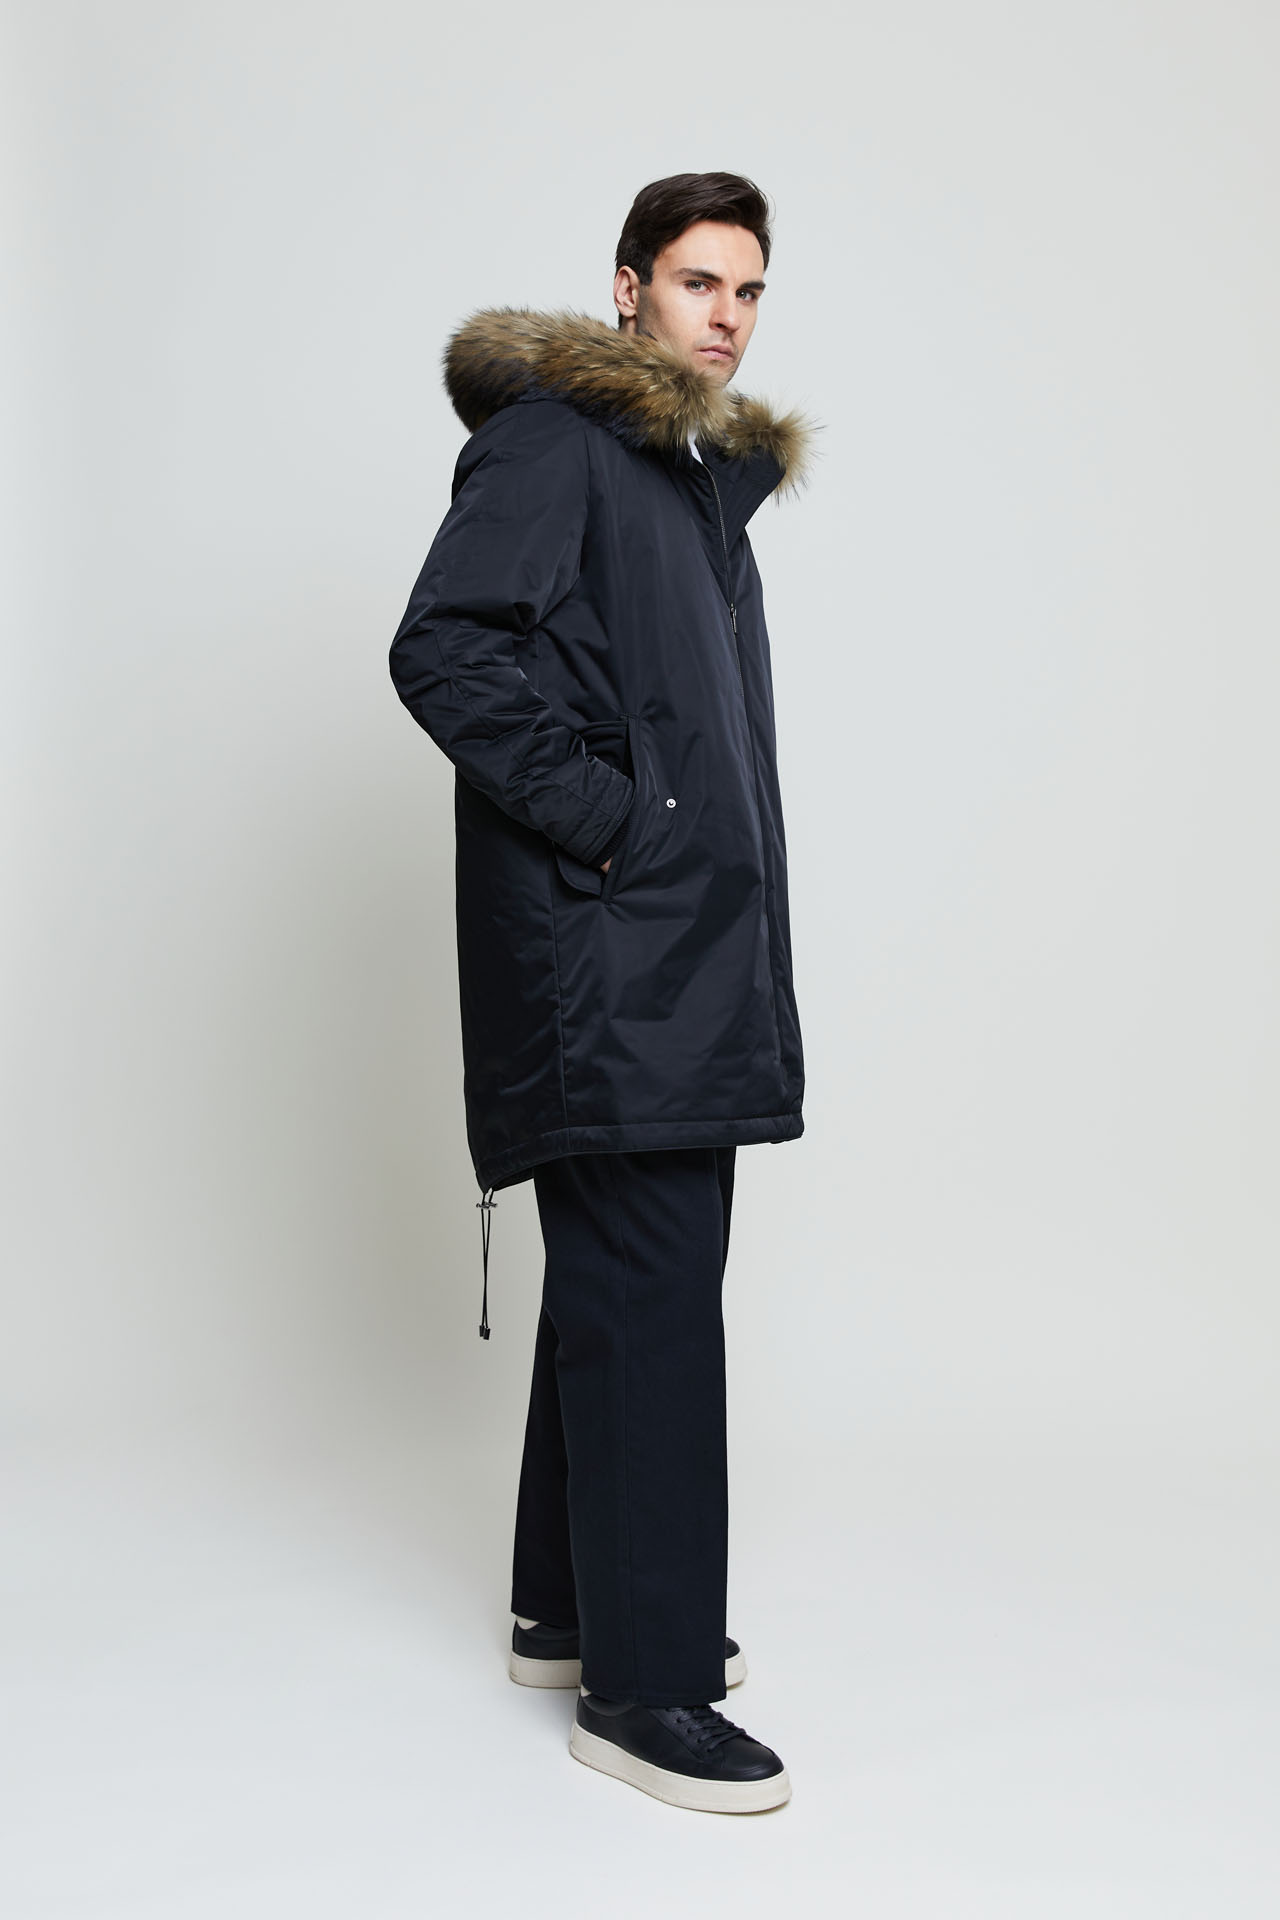 Men's parka with fur lining